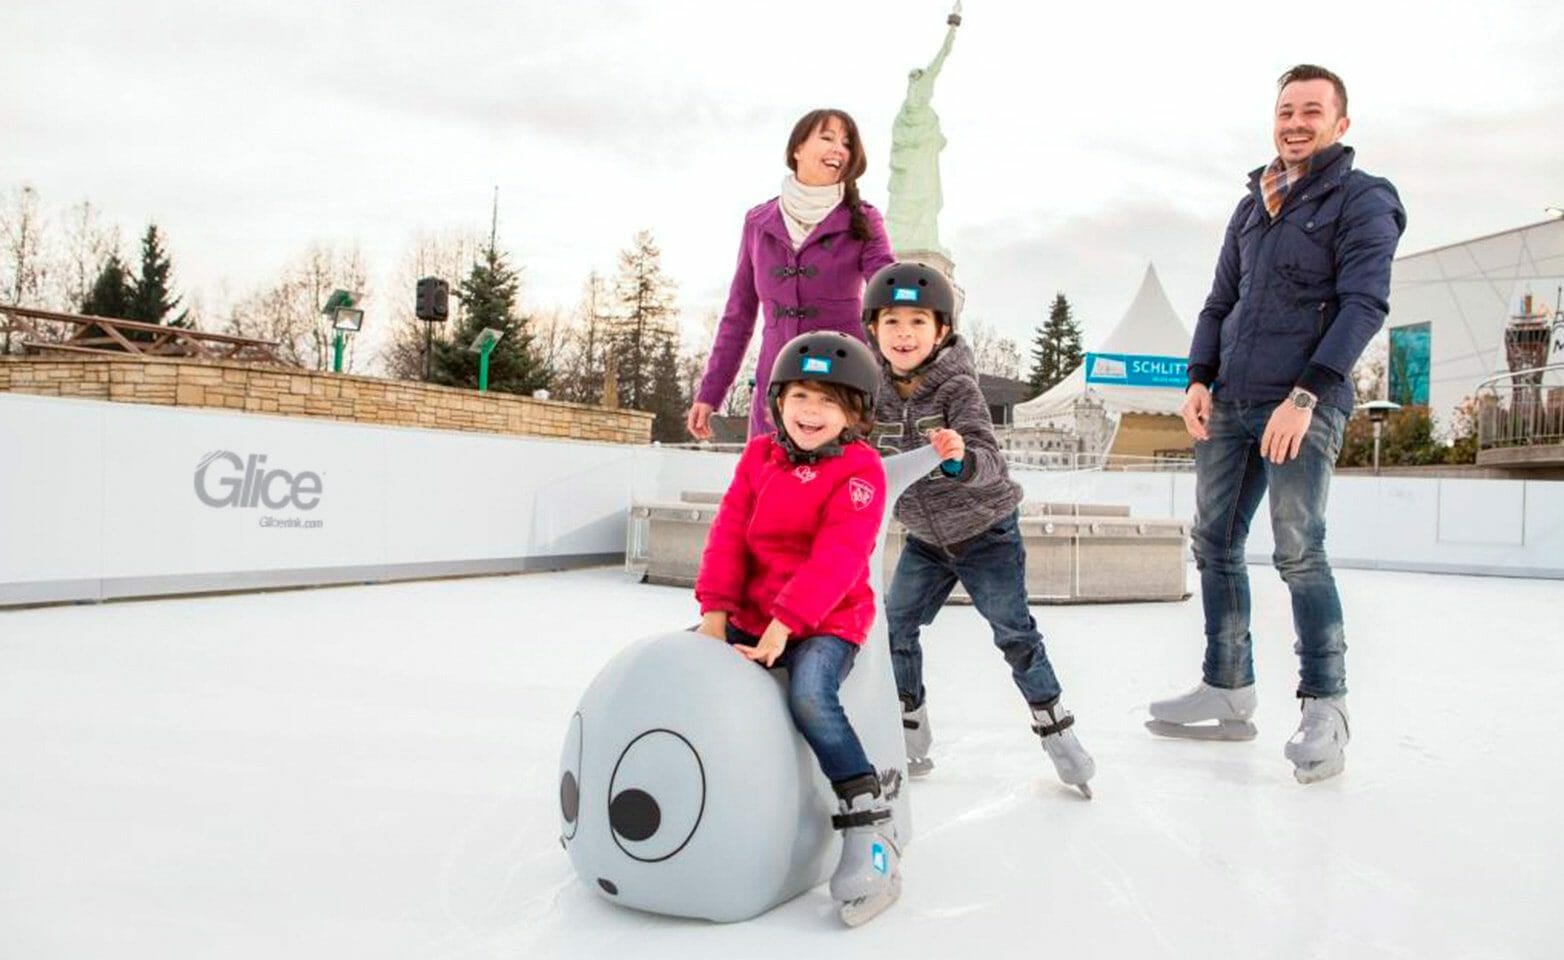 Family skating fun on synthetic ice rink at Austrian amusement park